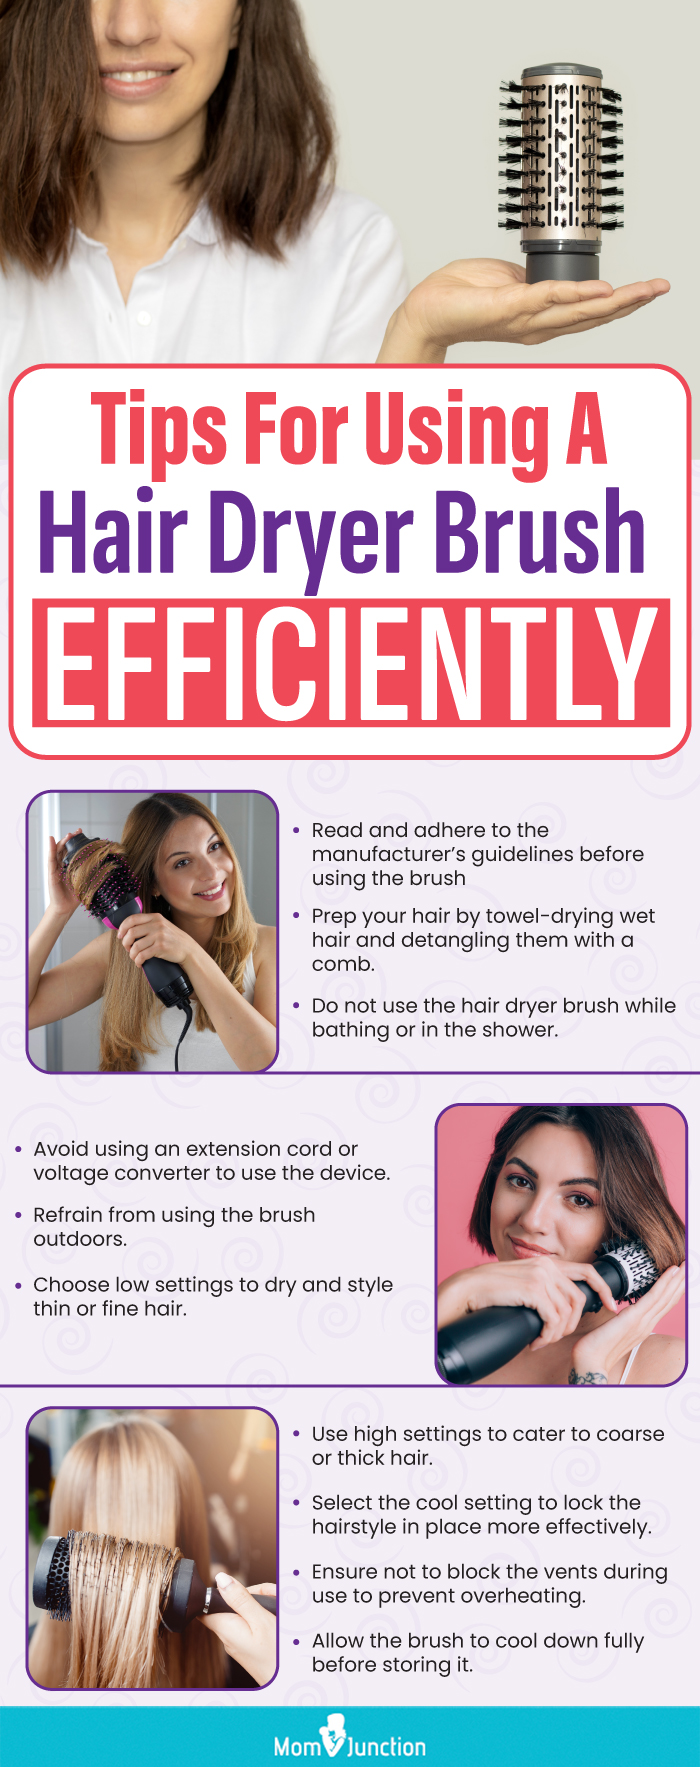 Tips For Using A Hair Dryer Brush Efficiently (infographic)